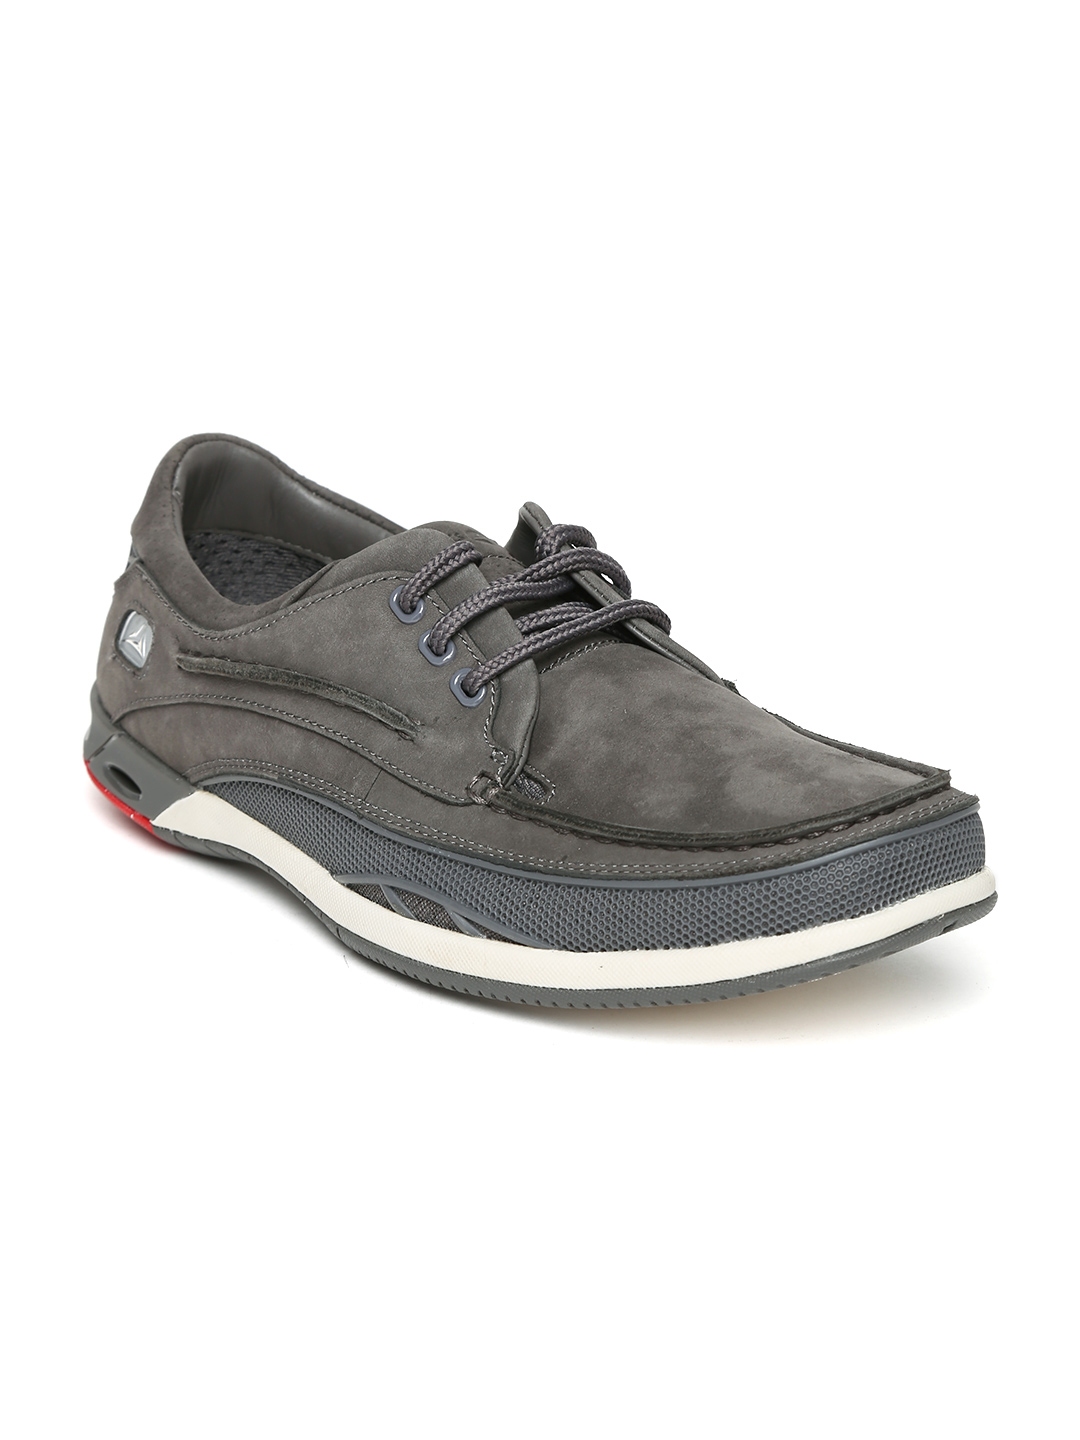 Buy Clarks Men Grey Suede Leather Casual Shoes - Casual Shoes for Men ...